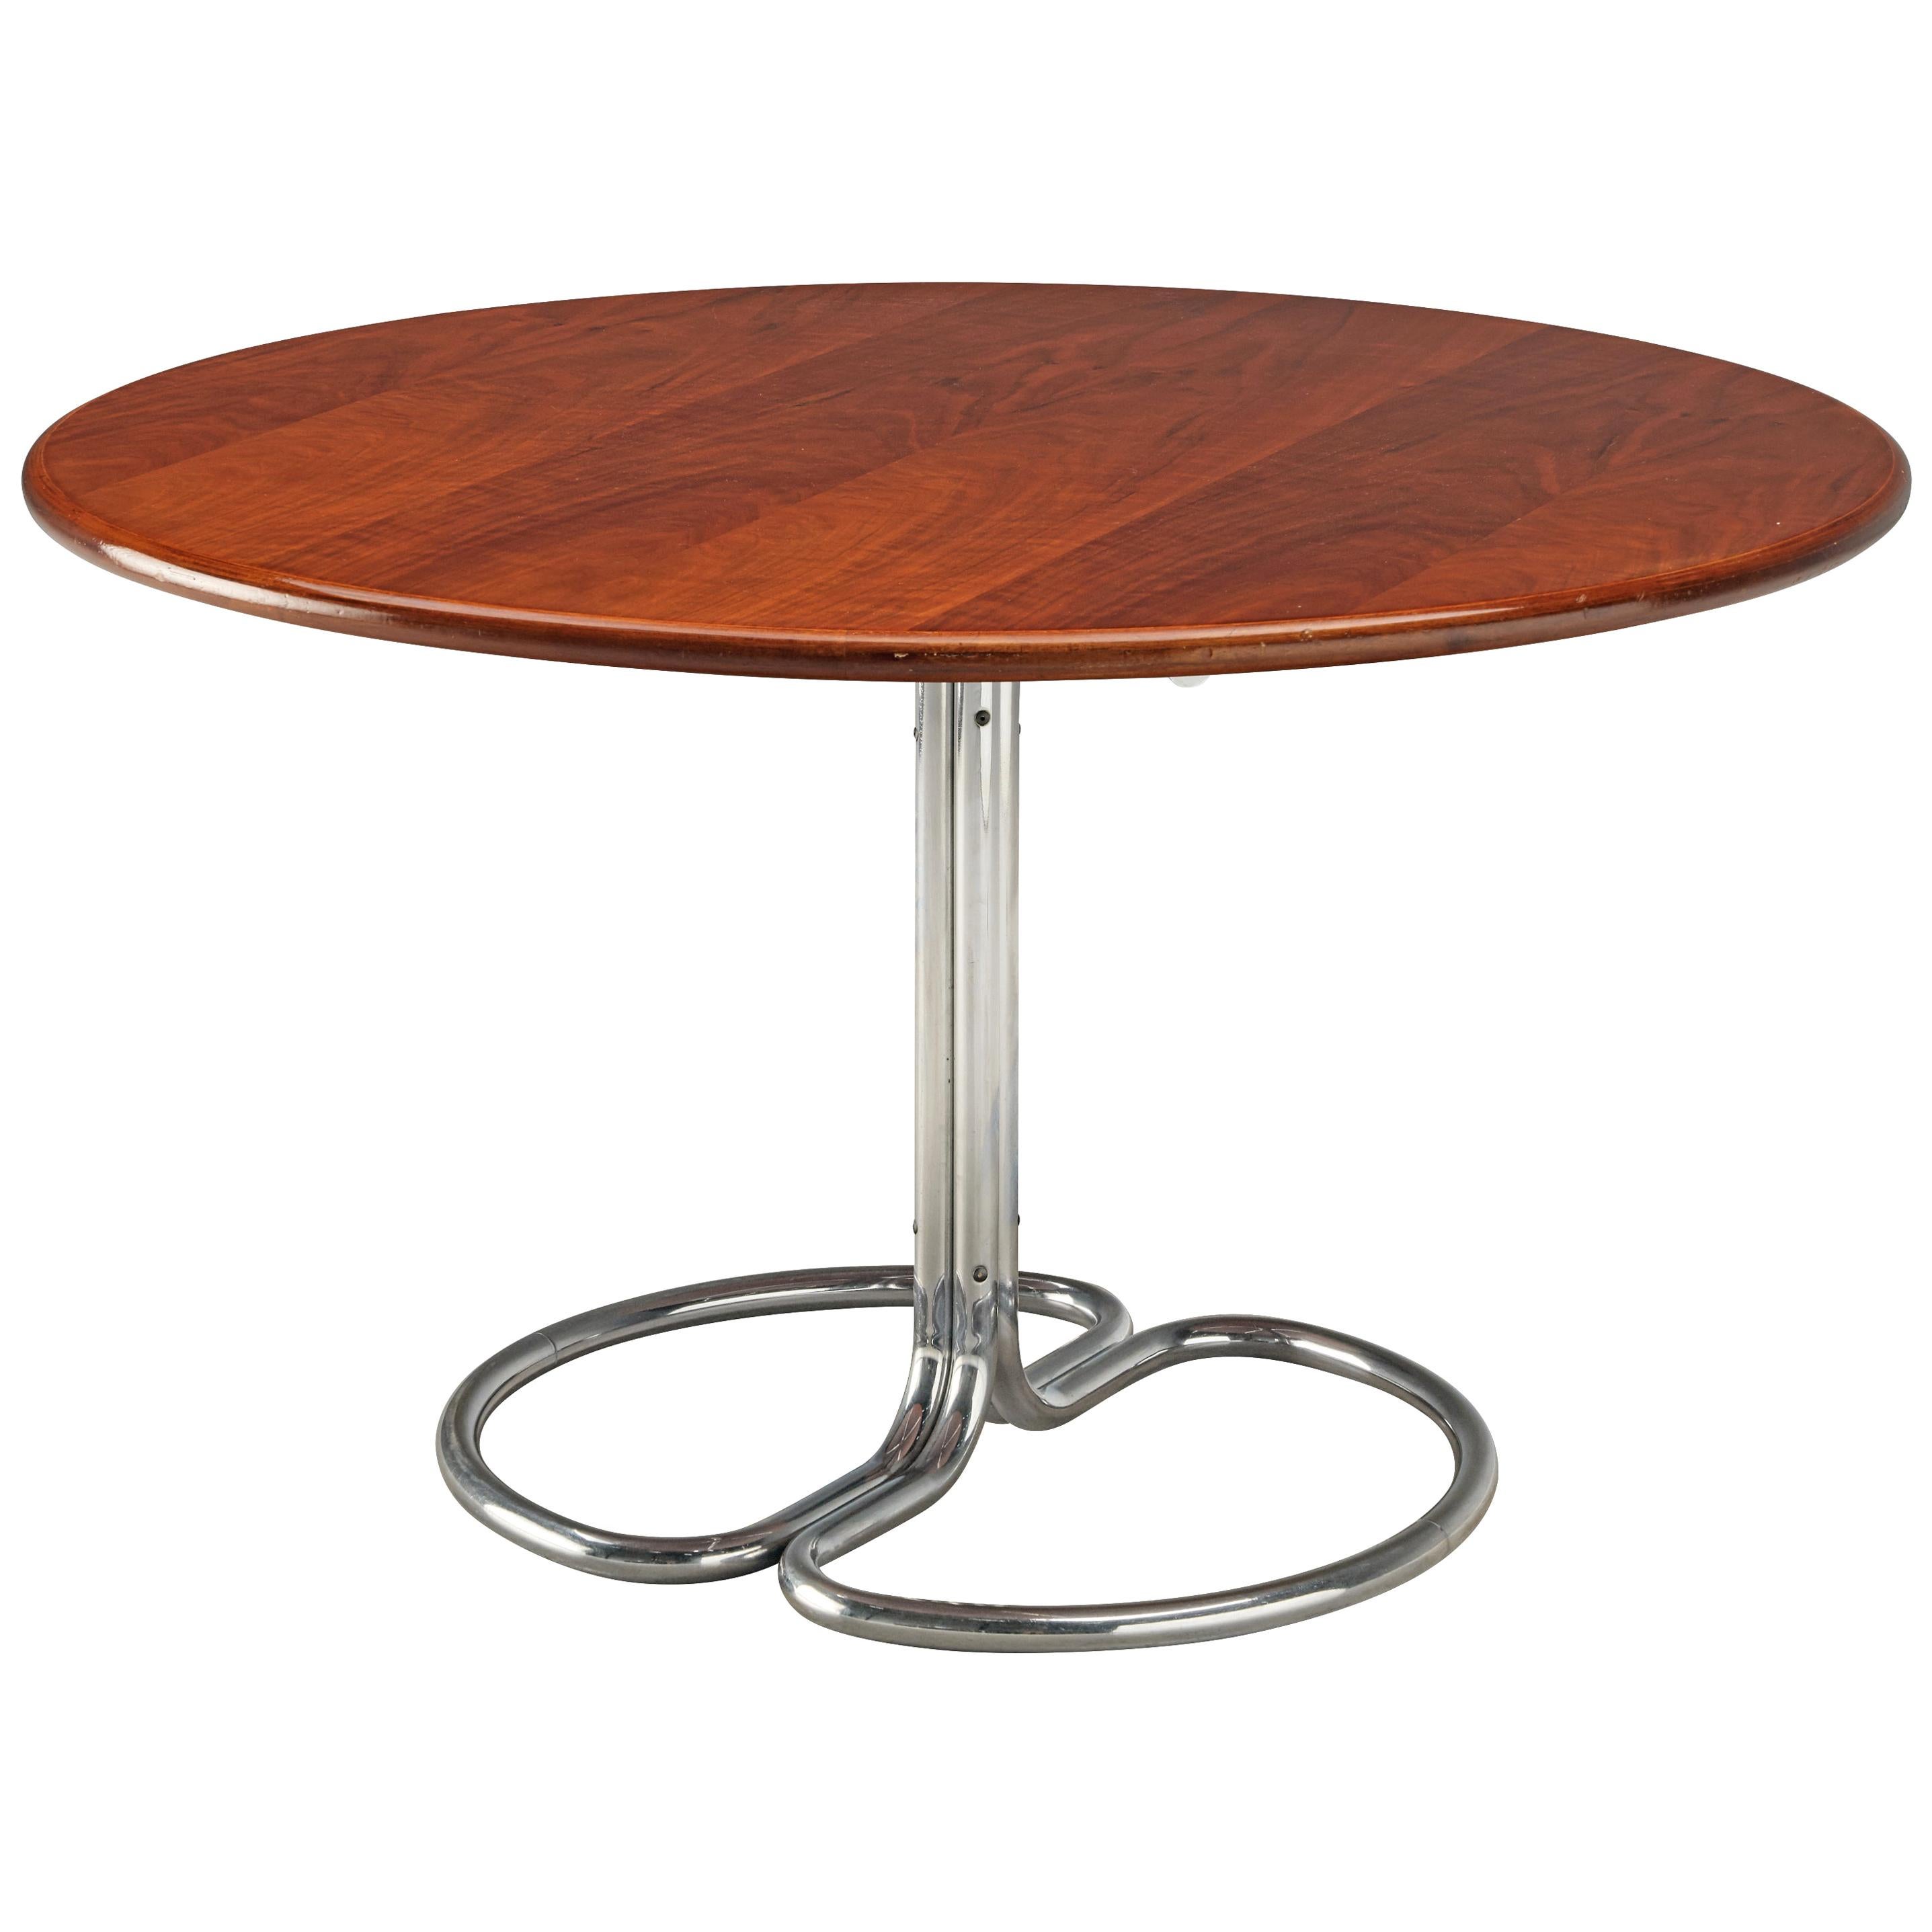 Giotto Stoppino for Bernini Round Dining Table 'Maia' in Walnut and Metal